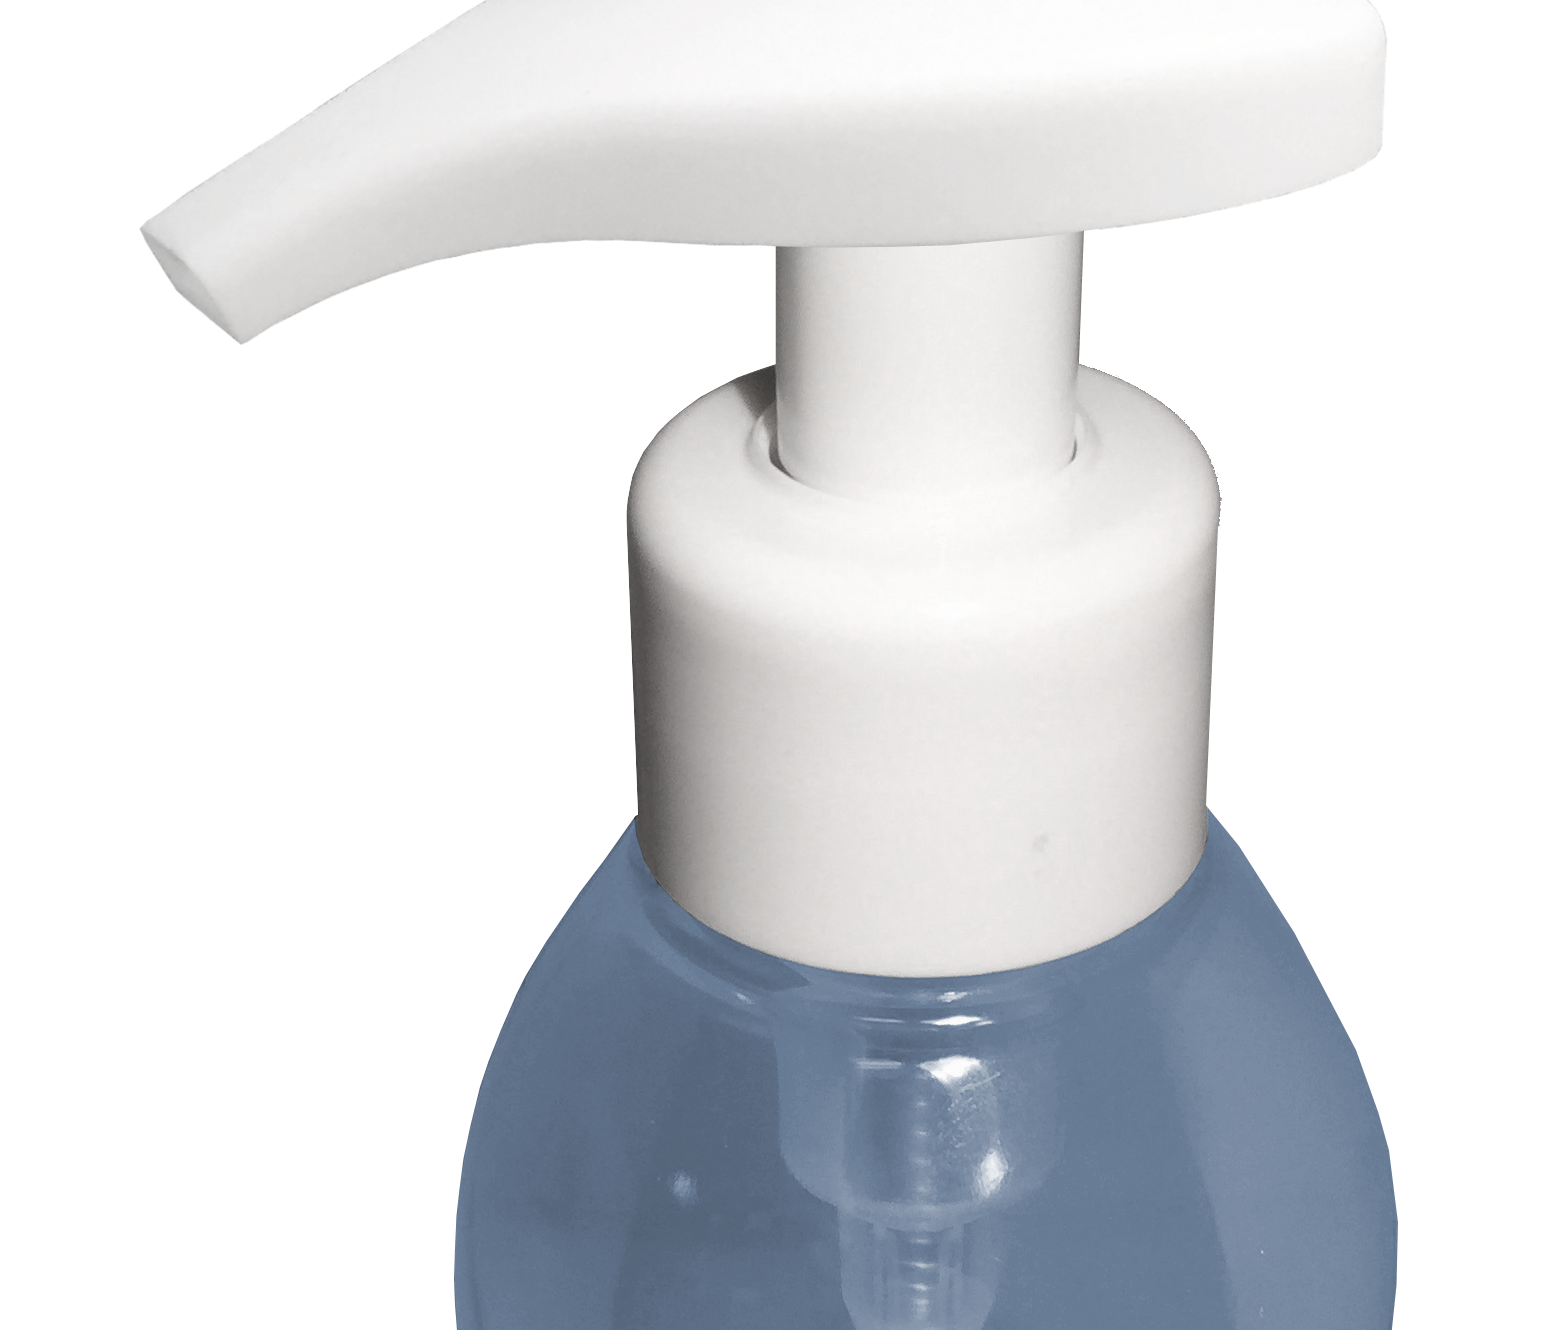 Twist Lock White Dispenser Lotion Pump at Rs 5/piece in Coimbatore